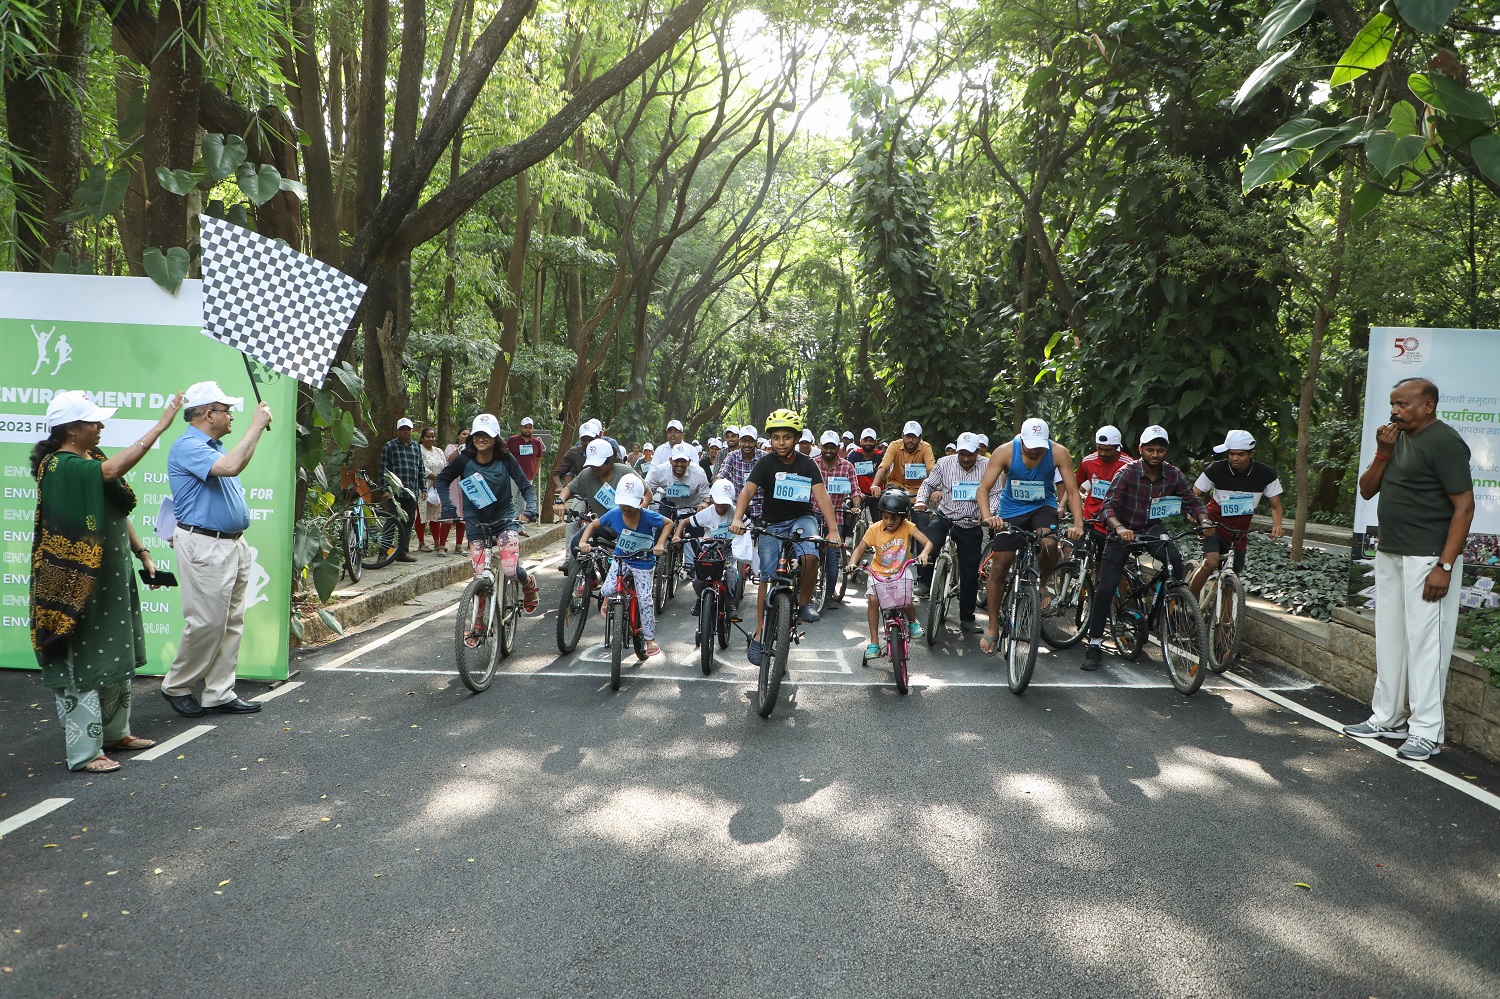 The IIMB community participated in the Cyclathon/Walkathon held on 5th June 2023, to celebrate World Environment Day.